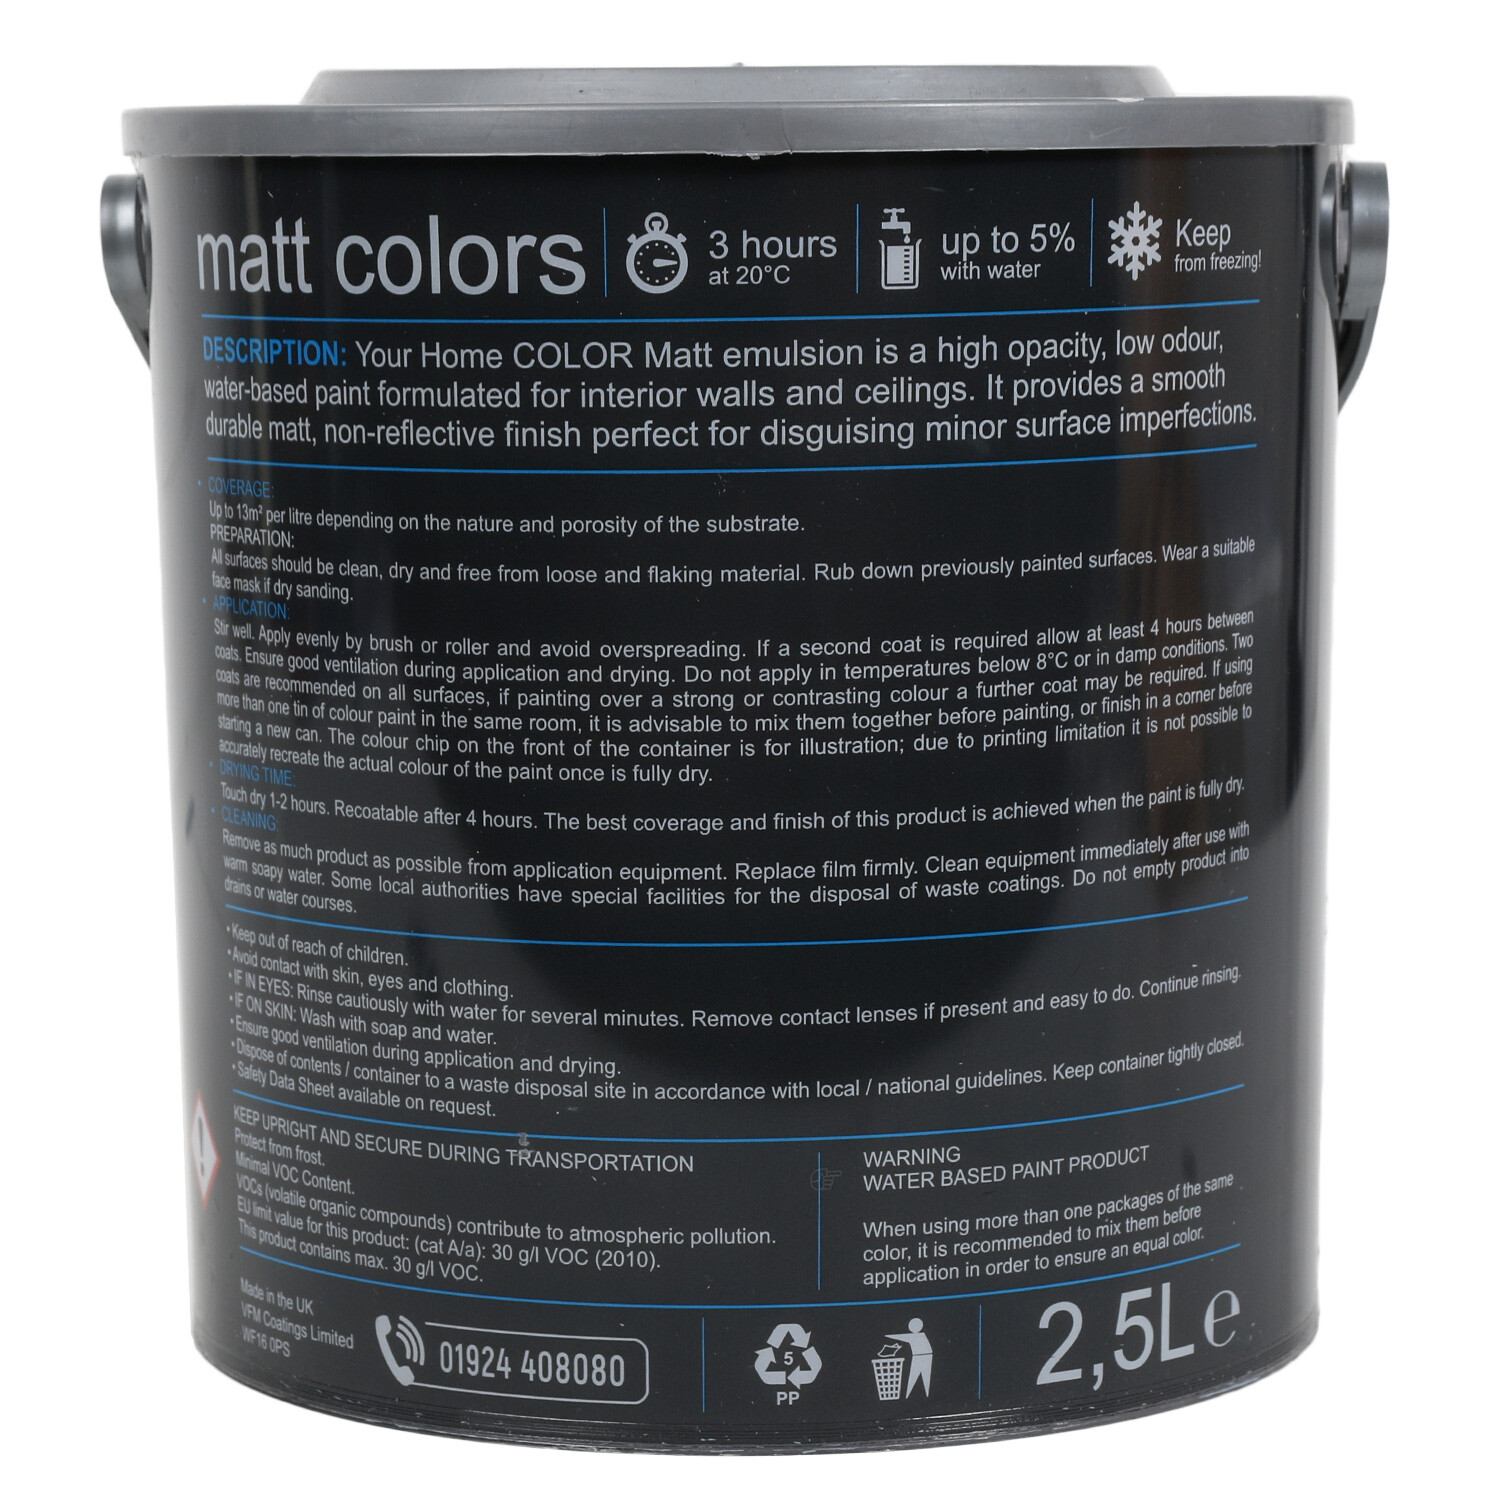 Your Home Walls and Ceilings Pearl Grey Matt Emulsion Paint 2.5L Image 2